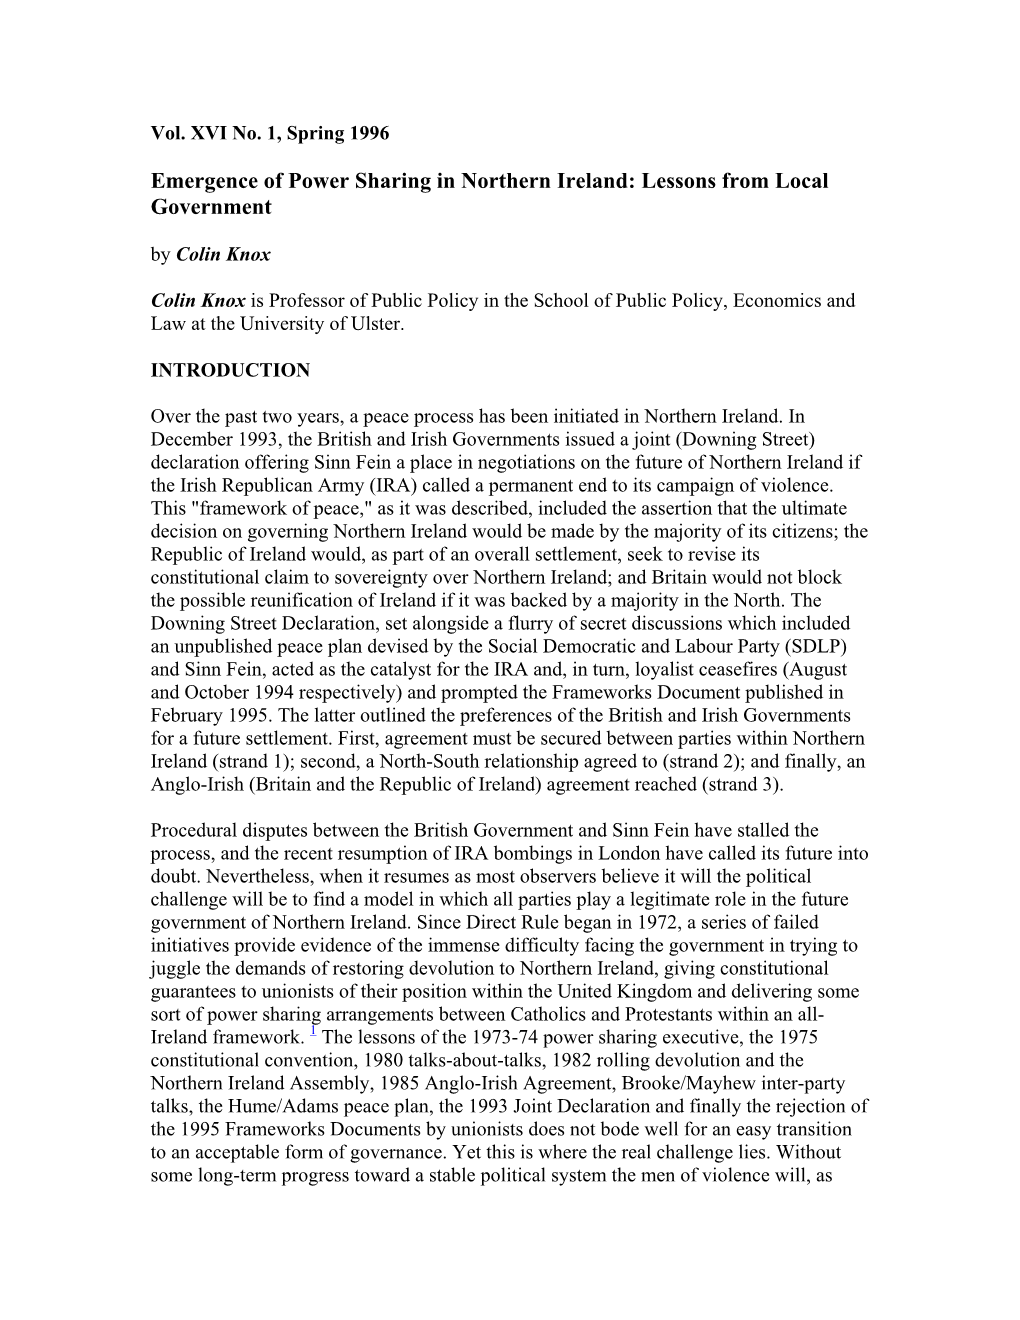 Emergence of Power Sharing in Northern Ireland: Lessons from Local Government